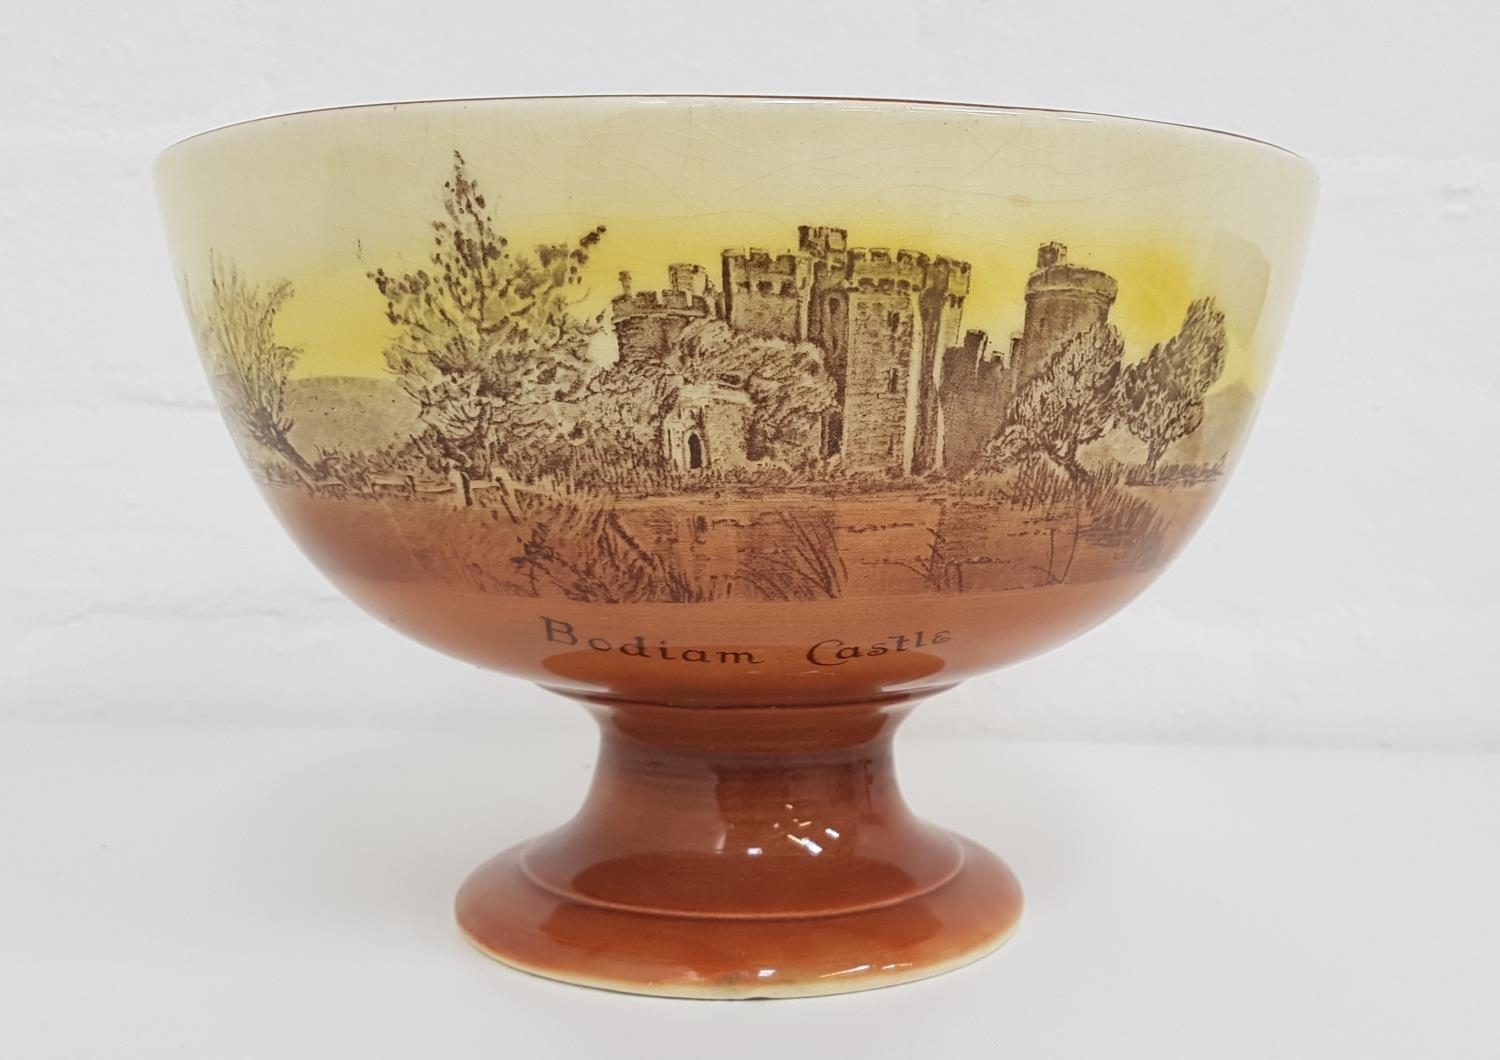 ROYAL DOULTON BOWL from the Church and Castle Series, printed and painted with Arundel and Bodiam